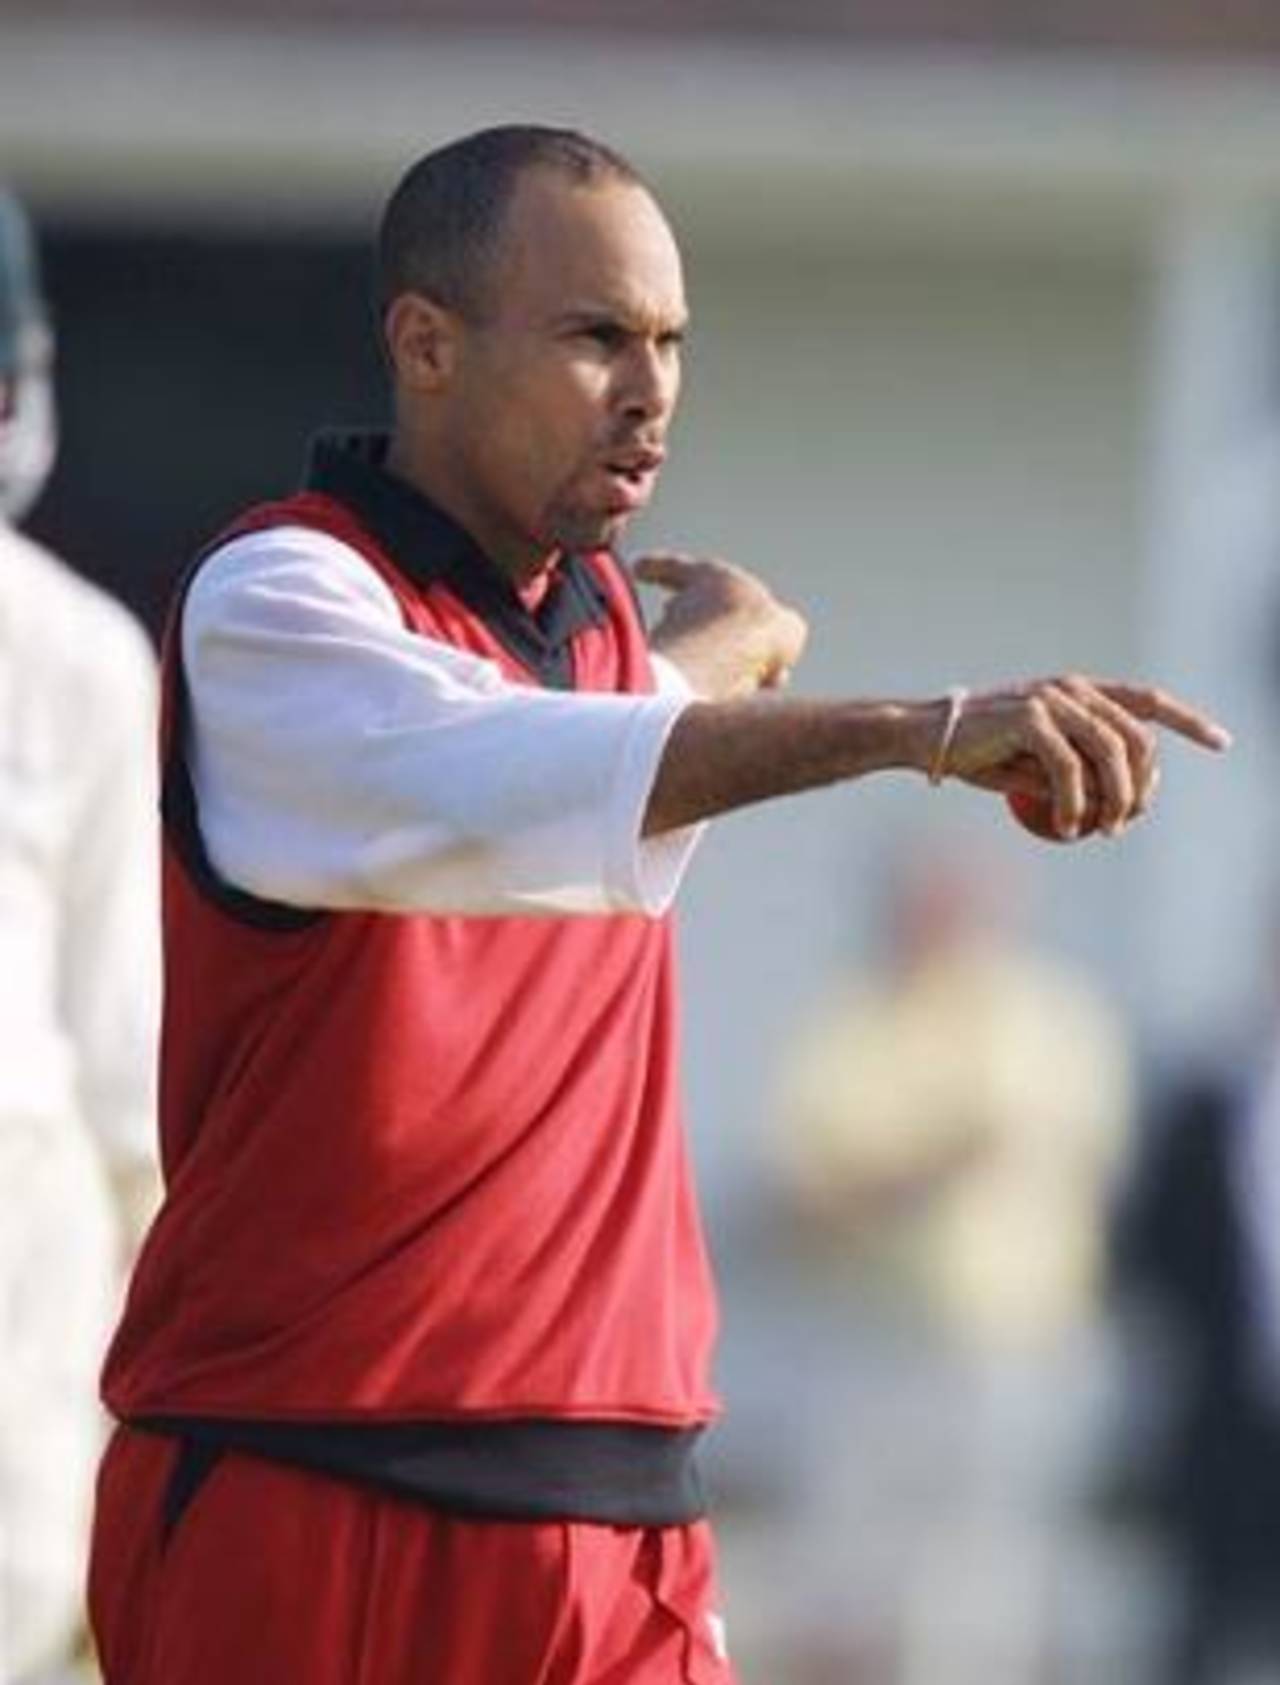 Jimmy Adams has been appointed coach of the West Indies Under-19 side